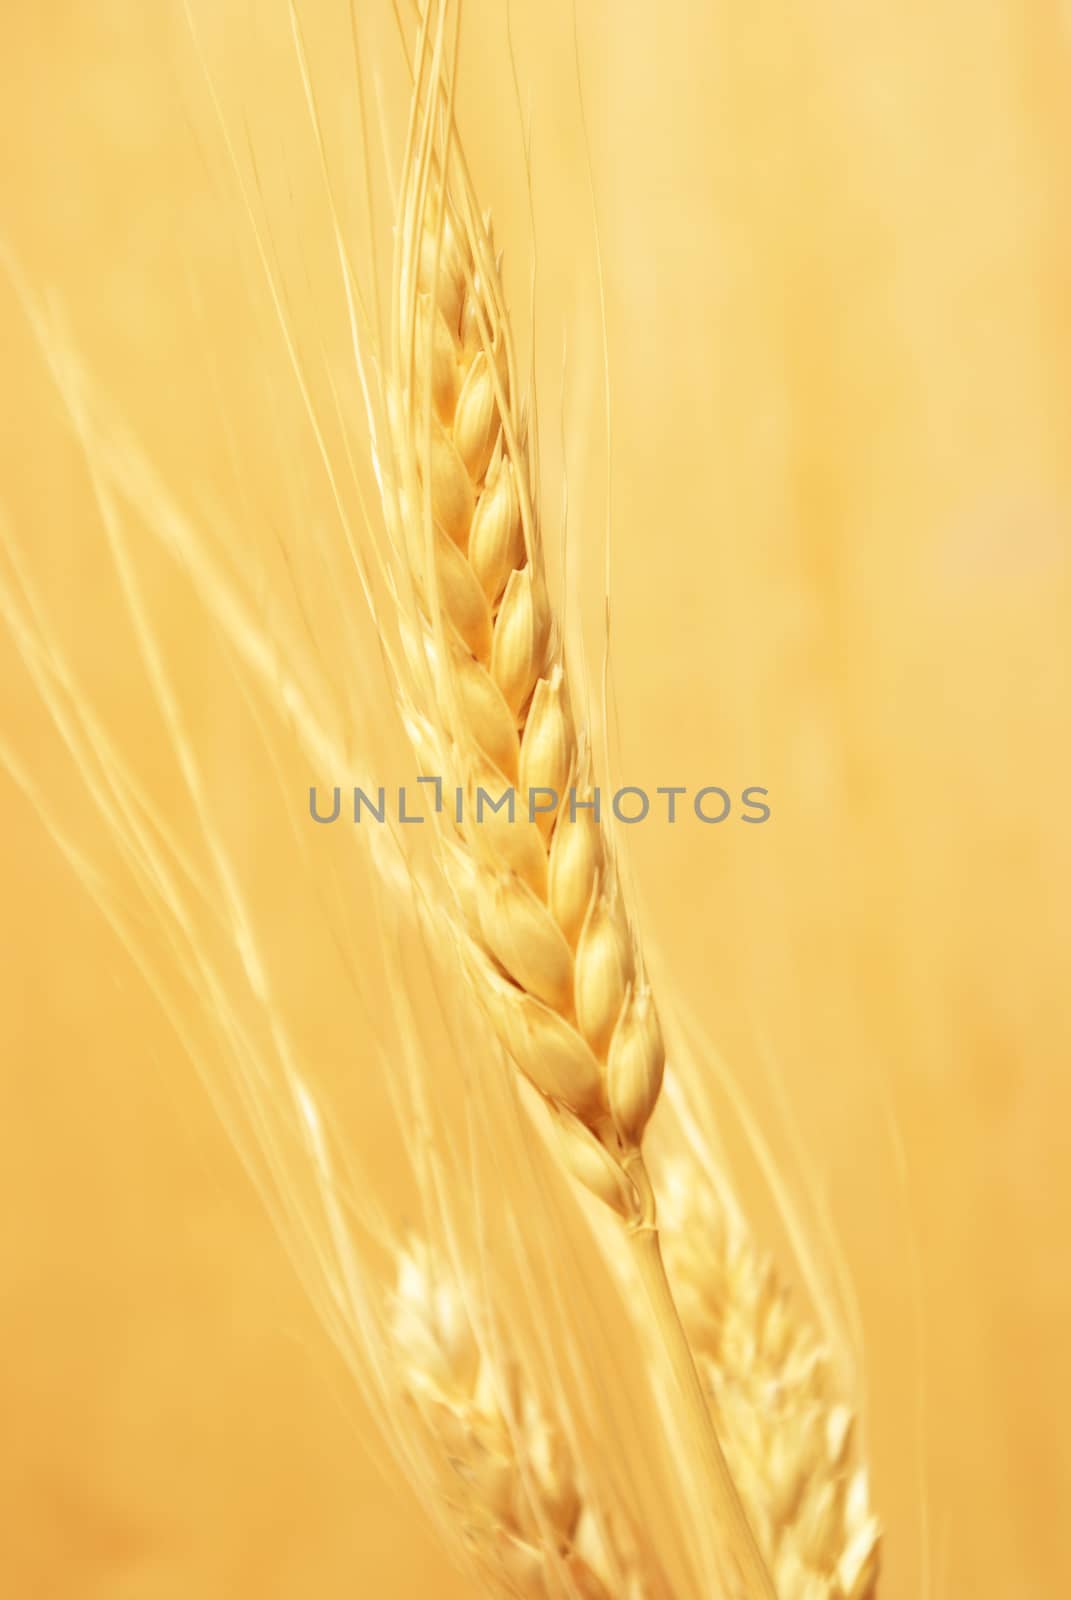 A closeup view of some bearded wheat crops in the harvest season.